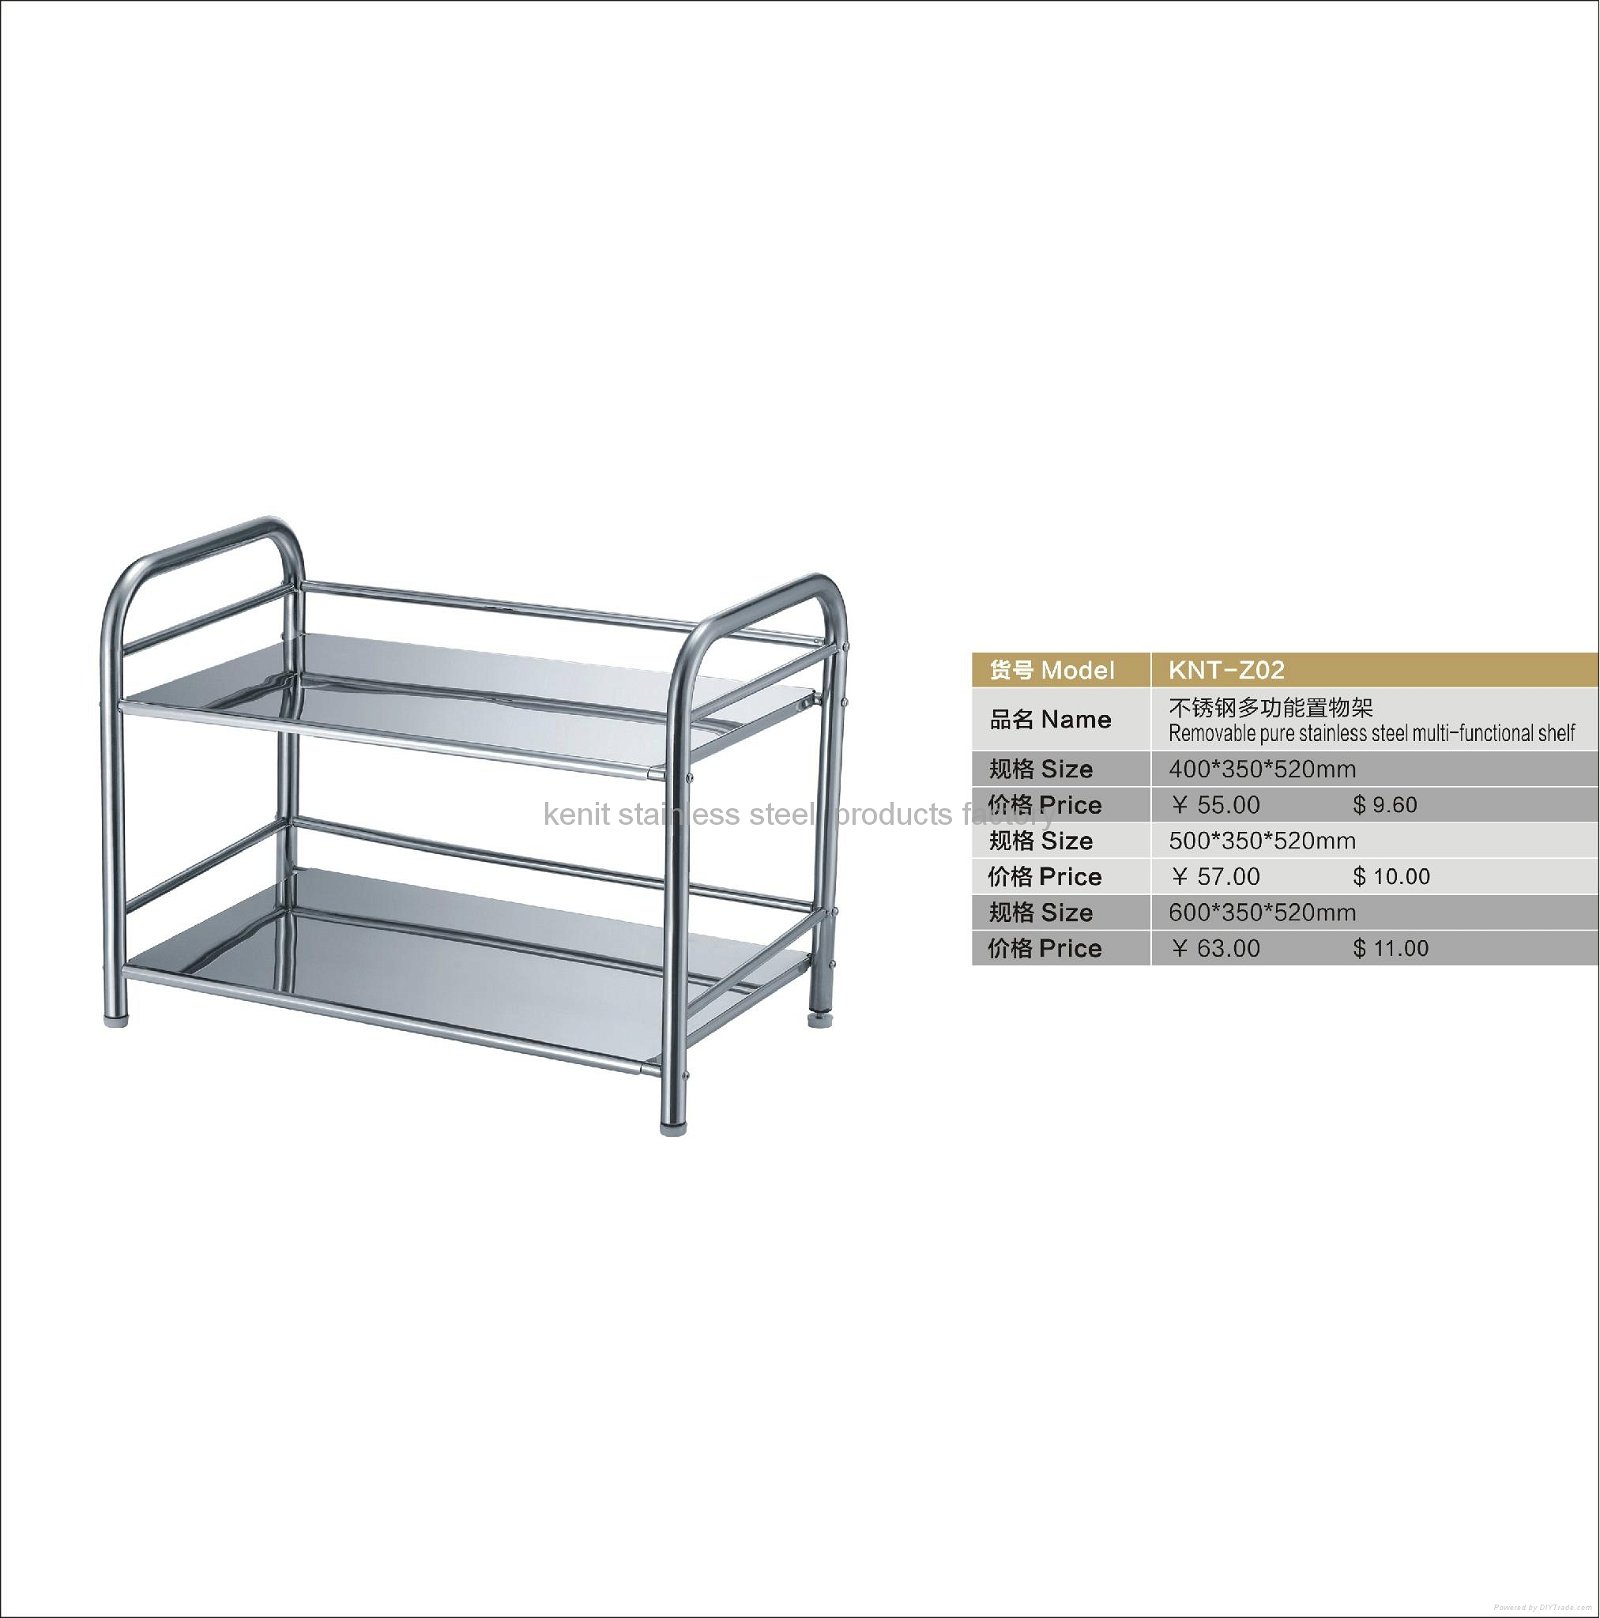 removable stainless steel multi-functional shelf